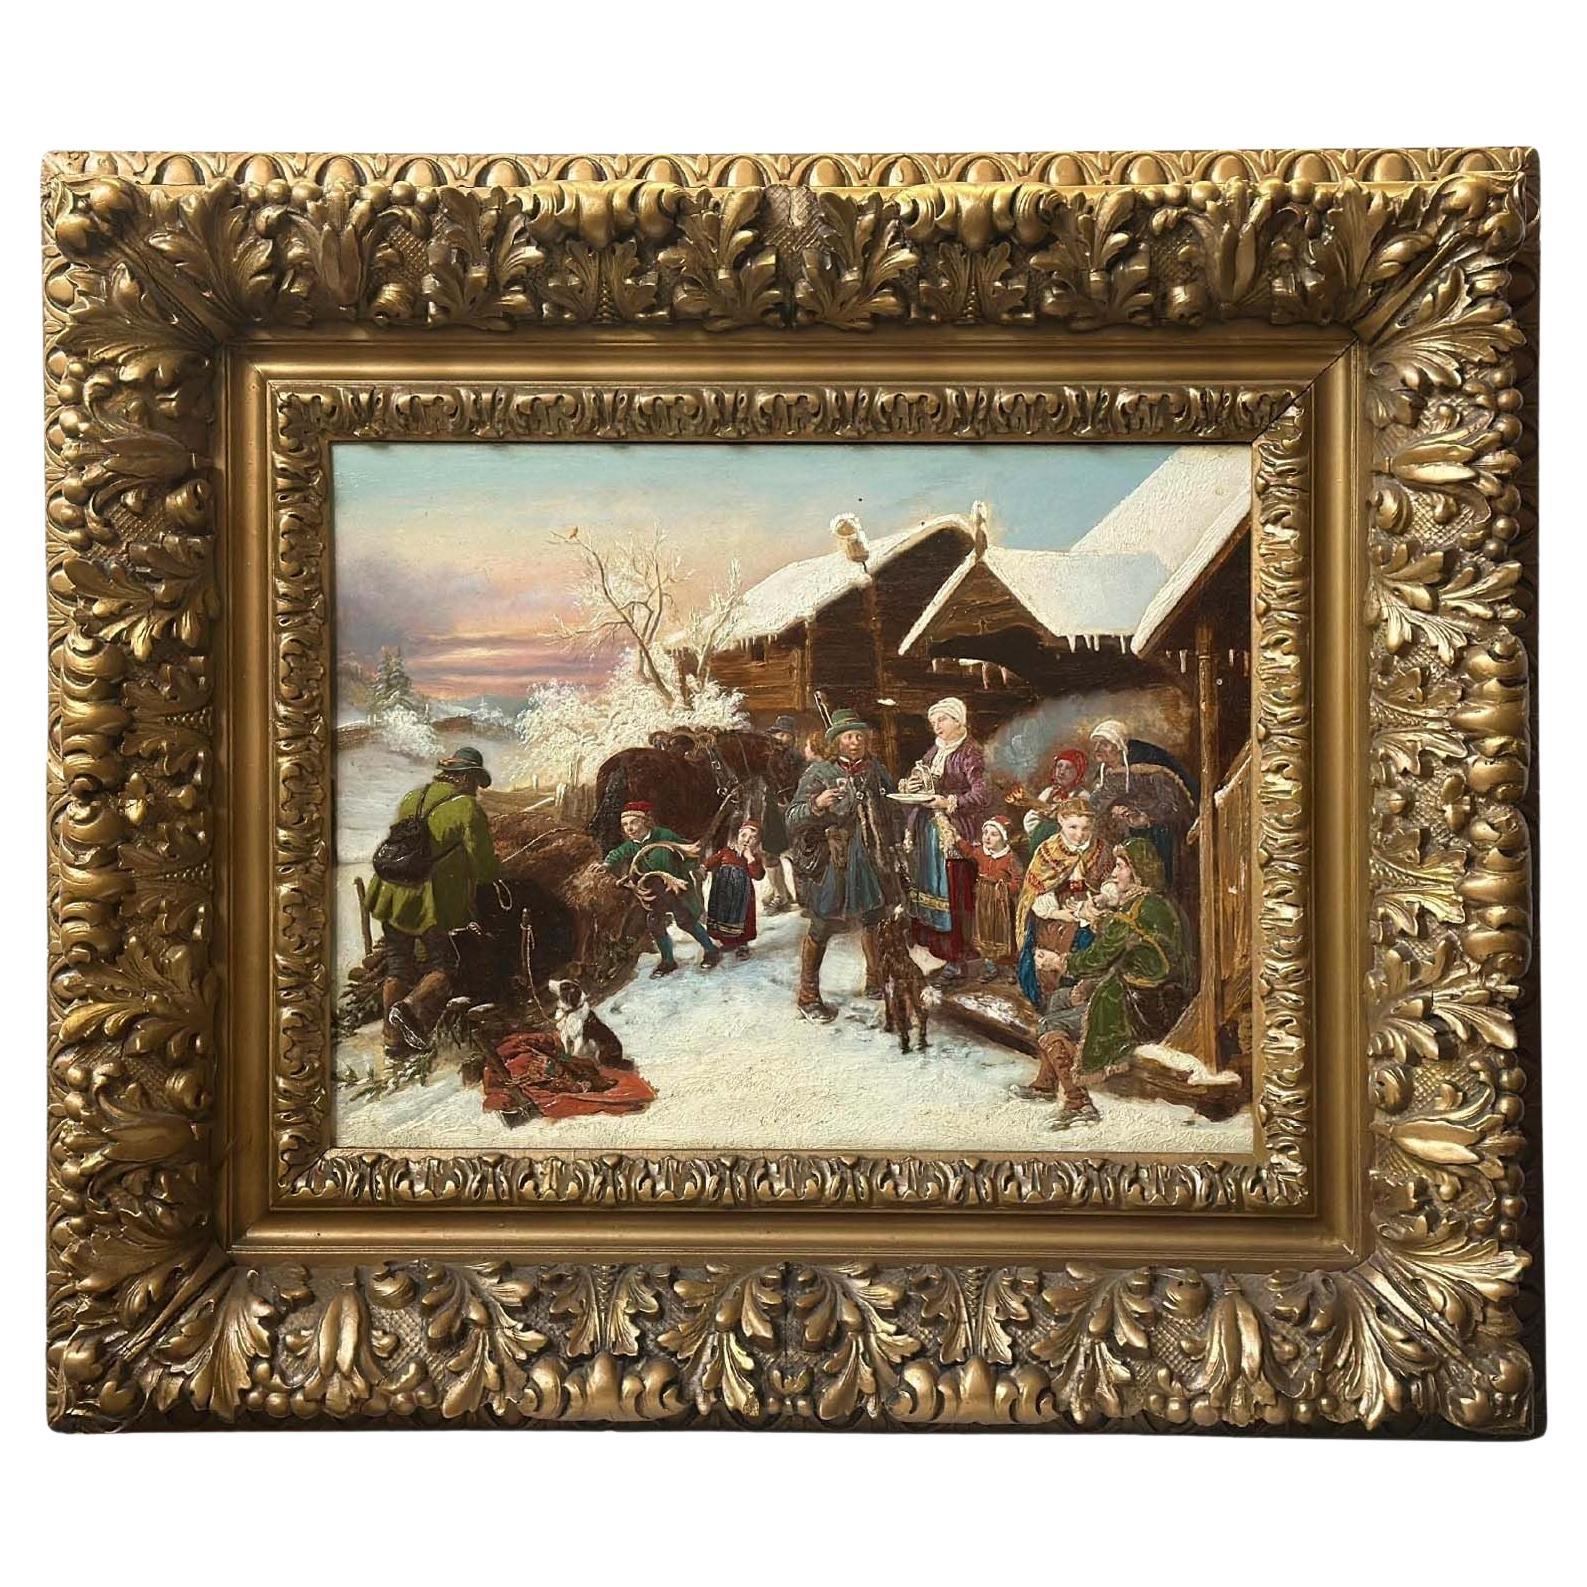 19th Century Russian Oil on Canvas of a Reindeer Hunt